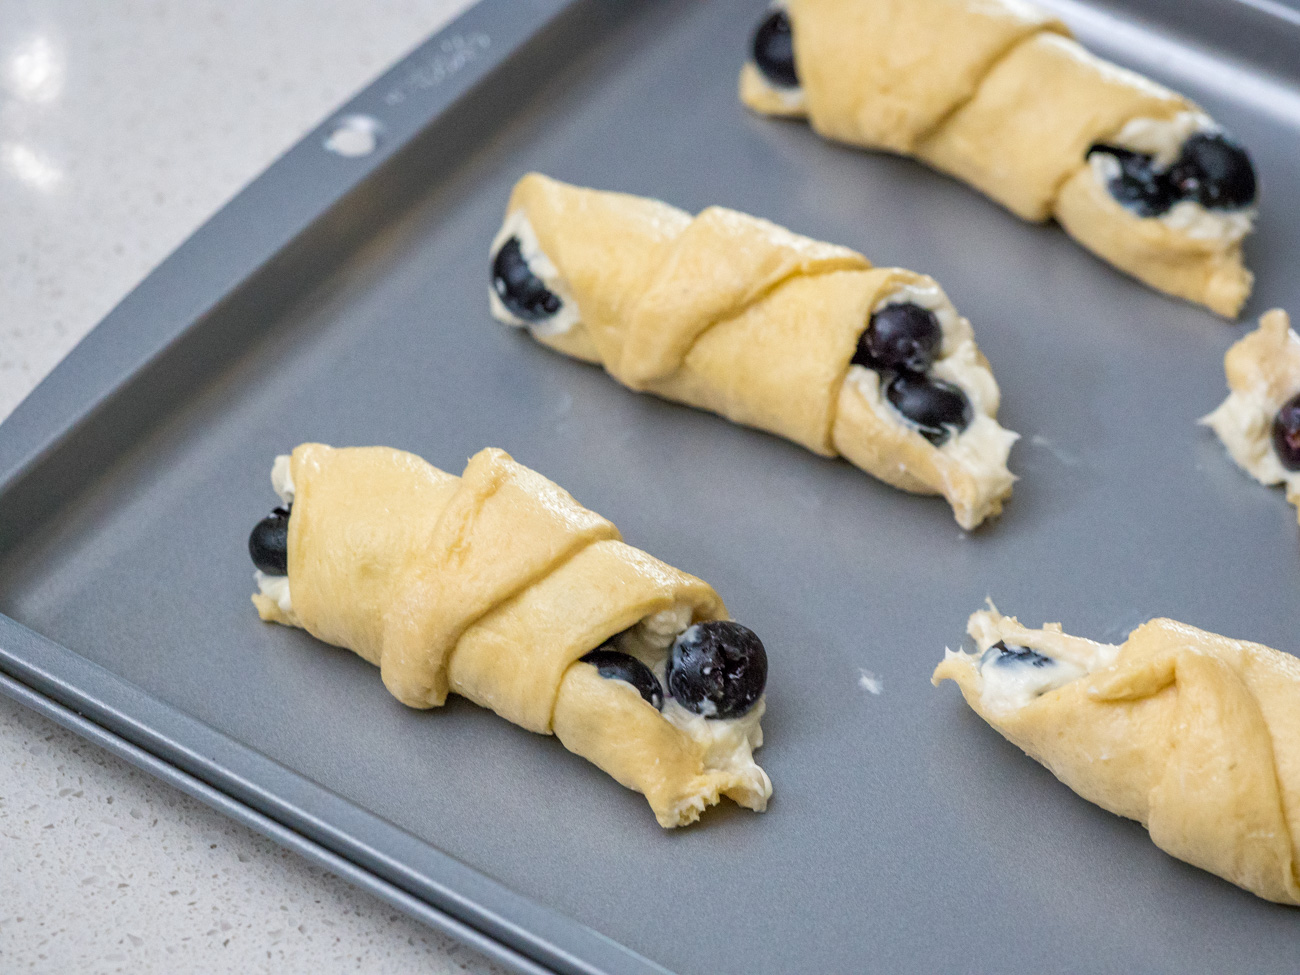 Place the finished roll onto a baking sheet and repeat with remaining ingredients to create 8 rolls.